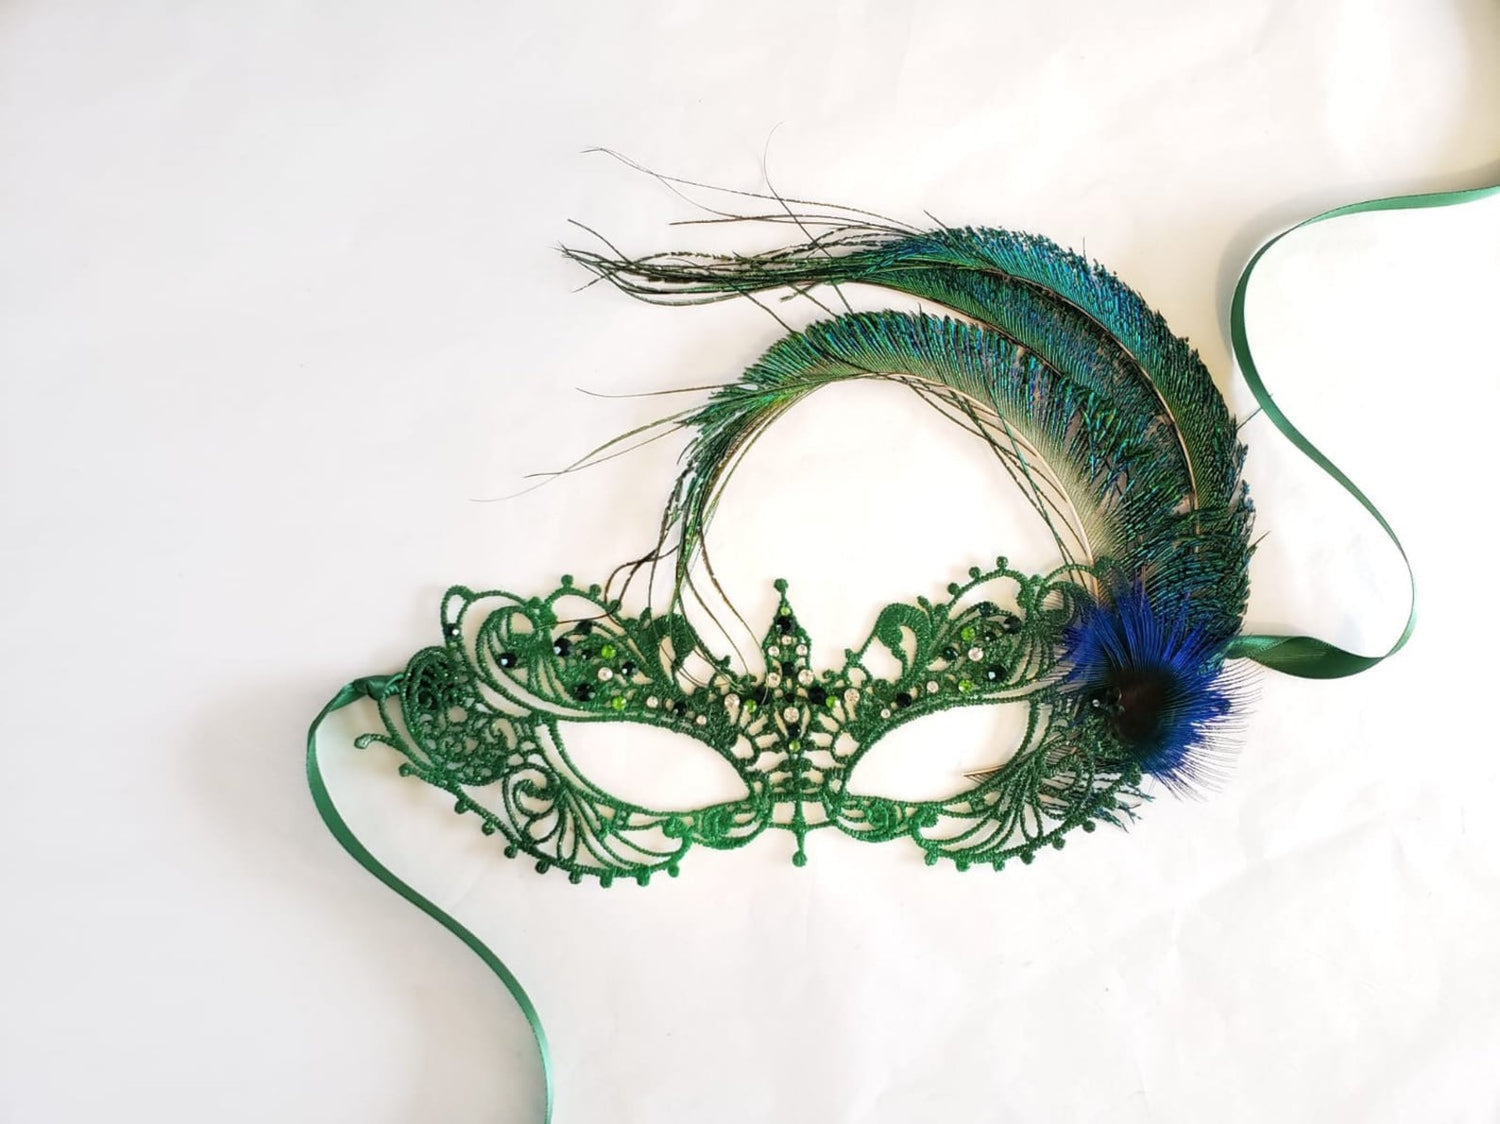 Womens masquerade mask with peacock feathers and green and clear rhinestones for sale.